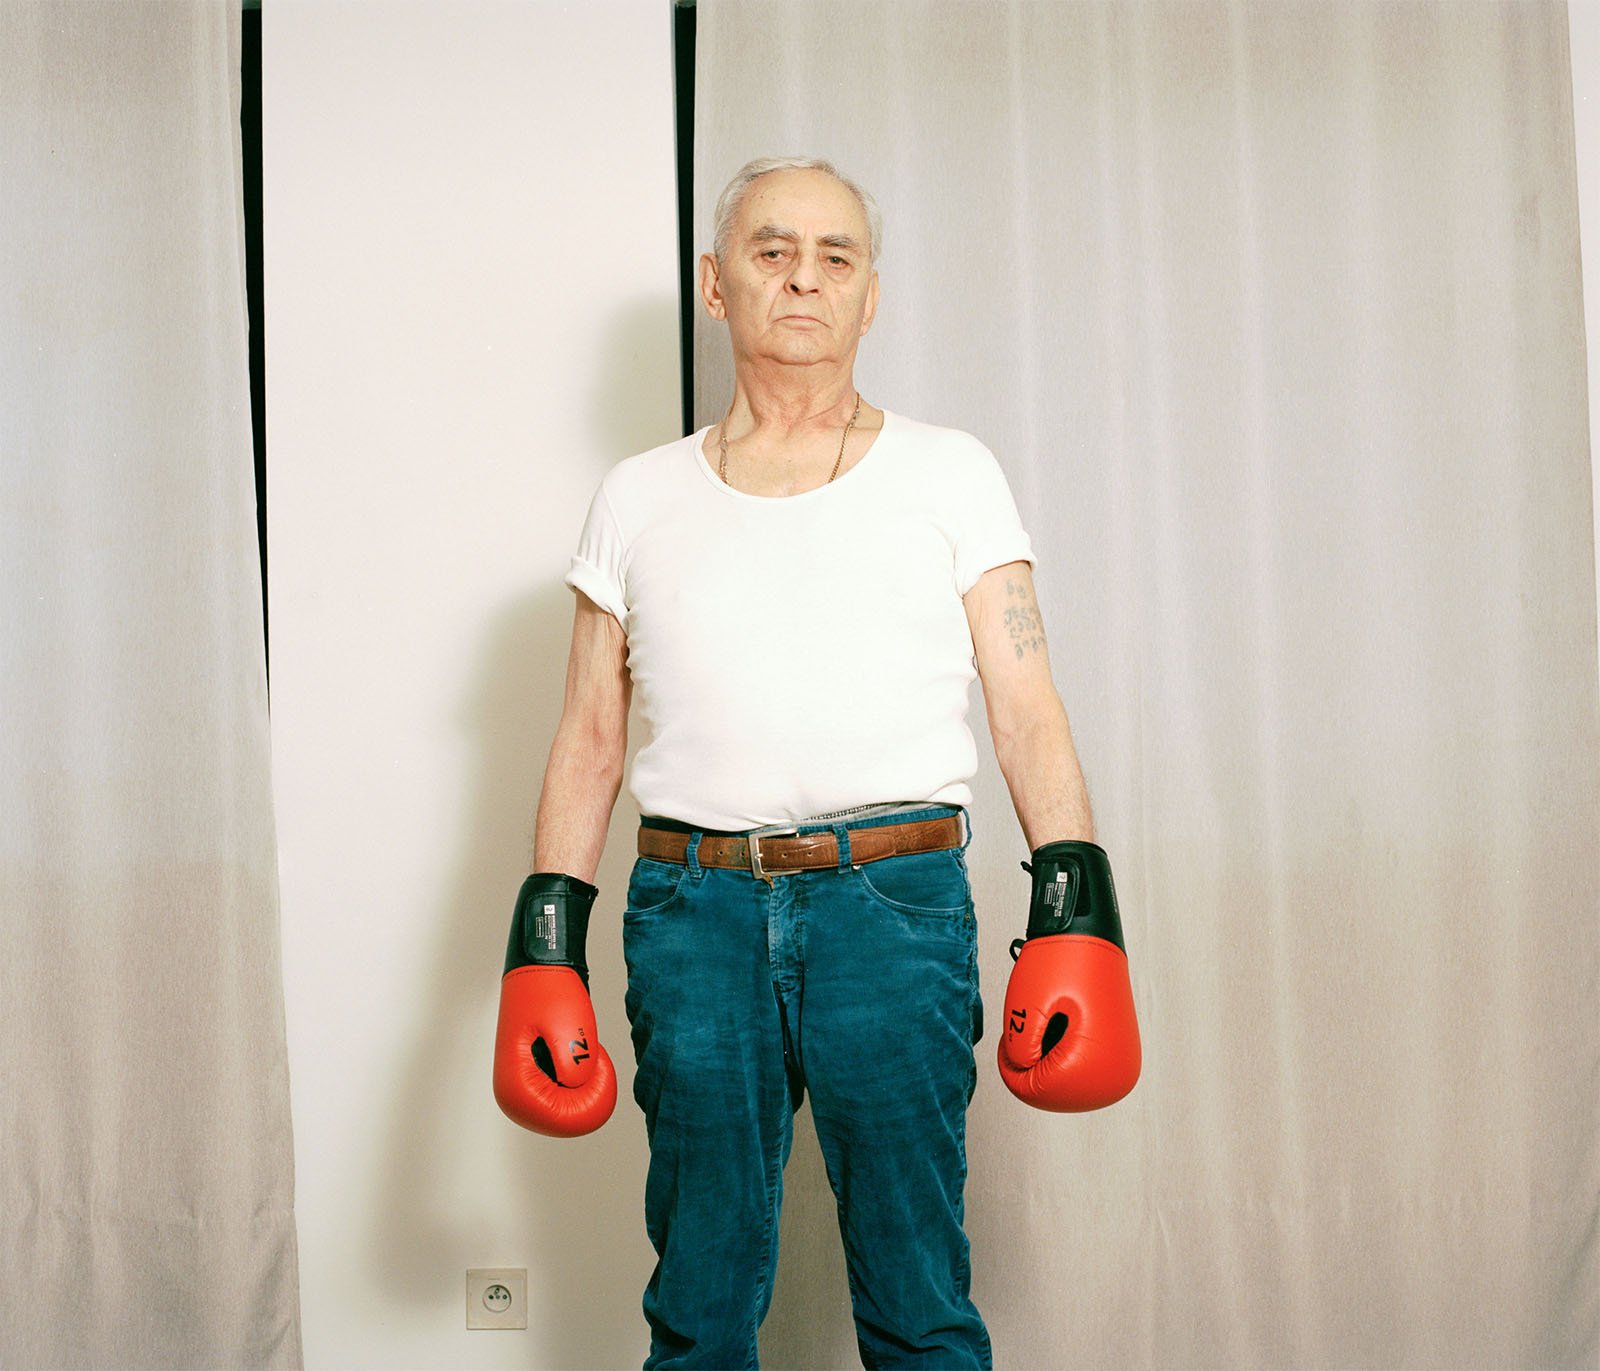 An elderly man with gray hair, wearing a white t-shirt, blue jeans, and a belt, stands with red boxing gloves on, posing confidently in front of a neutral curtain backdrop.